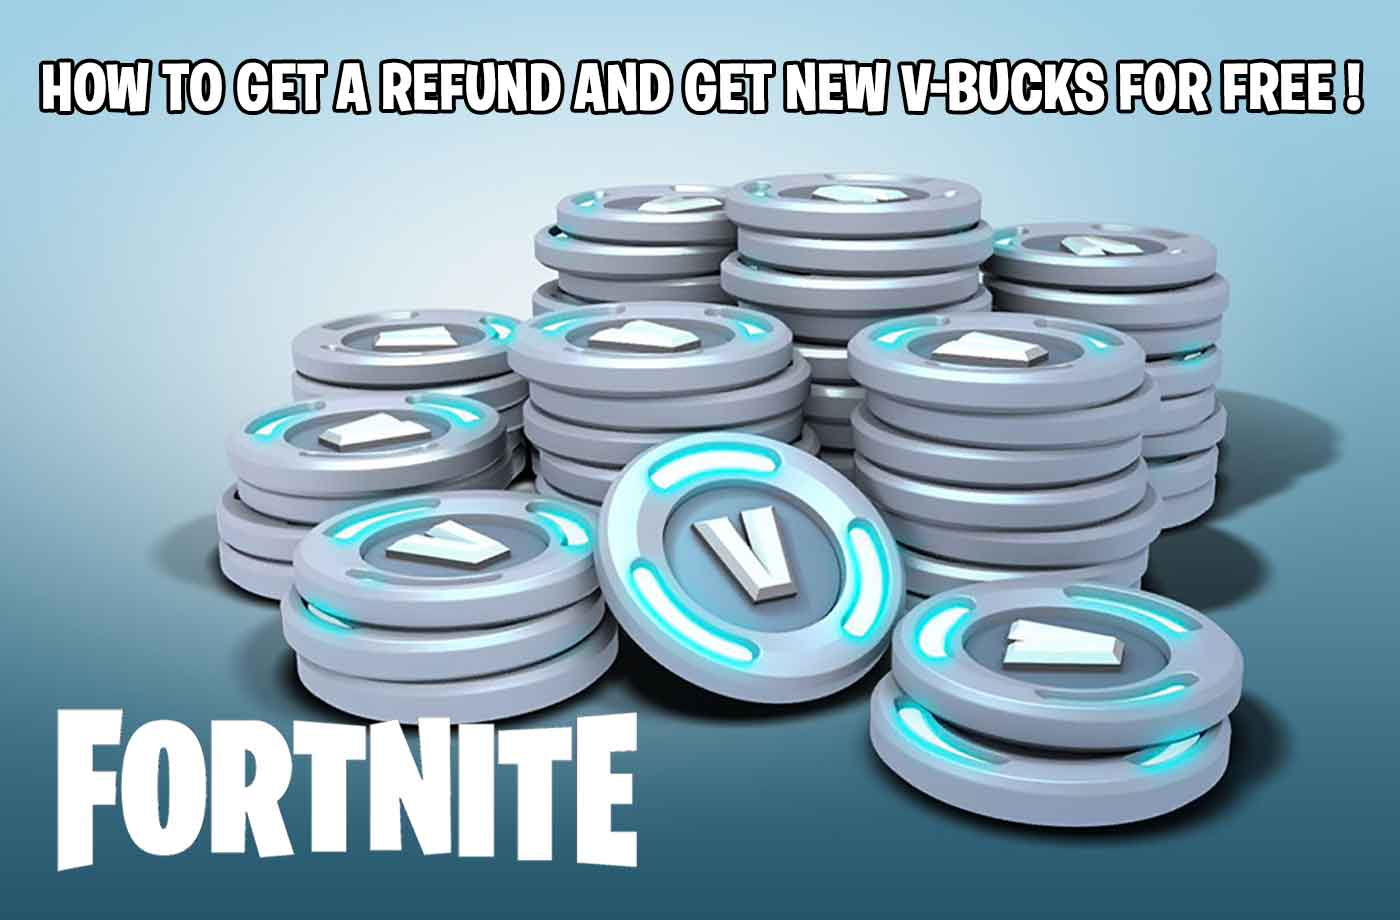 fortnite how to get a refund on a skin purchase in the shop and get v bucks back - fortnite v bucks refund request